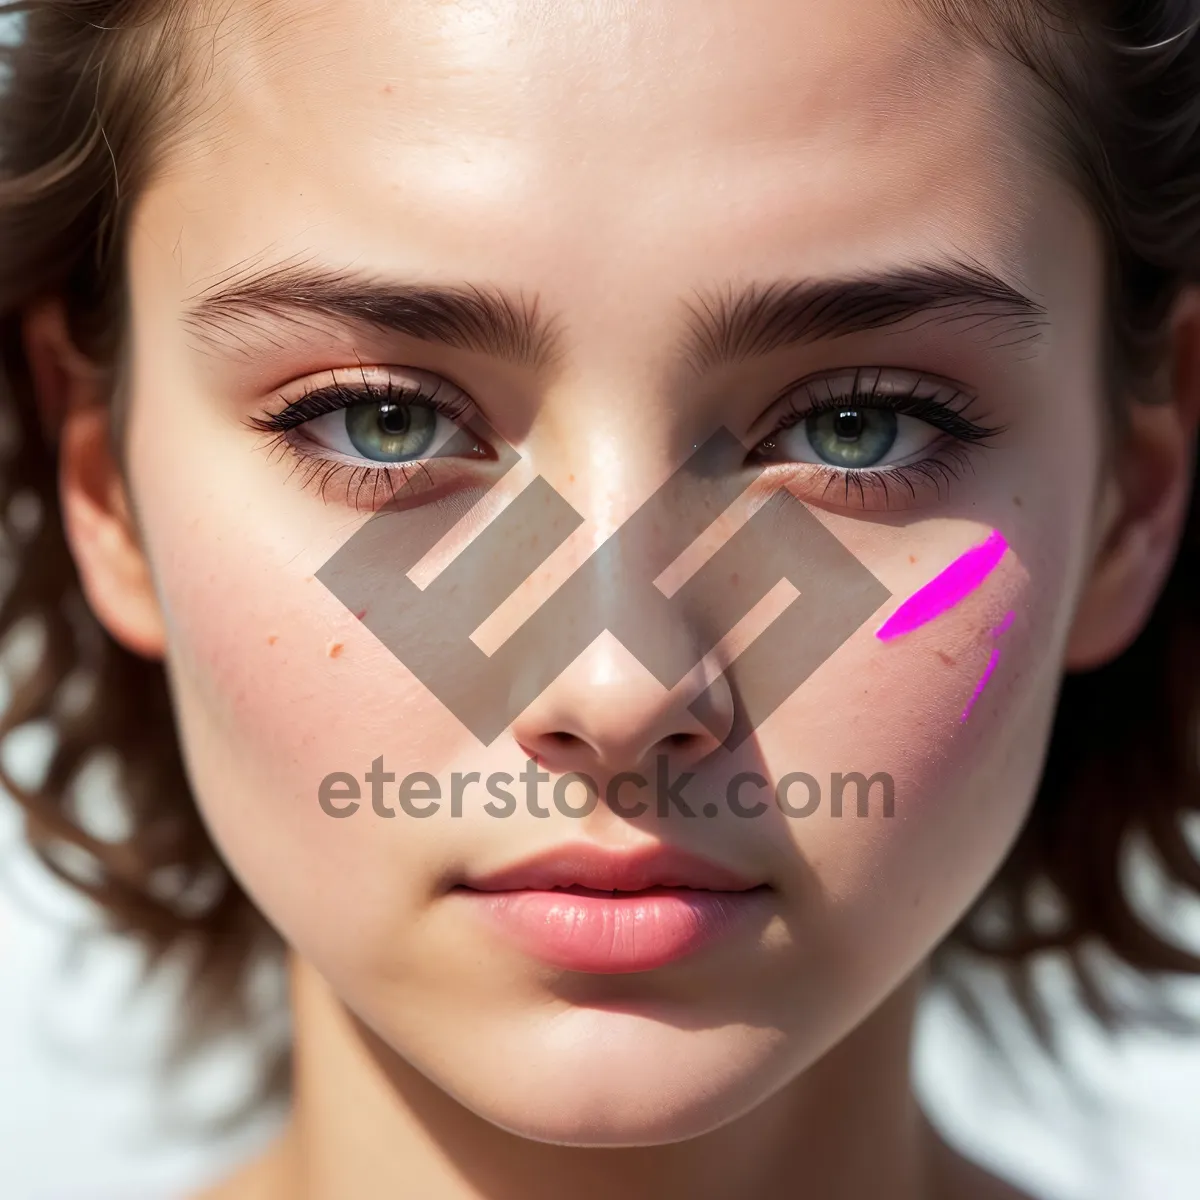 Picture of Radiant Beauty: Captivating Closeup of Attractive Model with Flawless Skin and Seductive Eyes